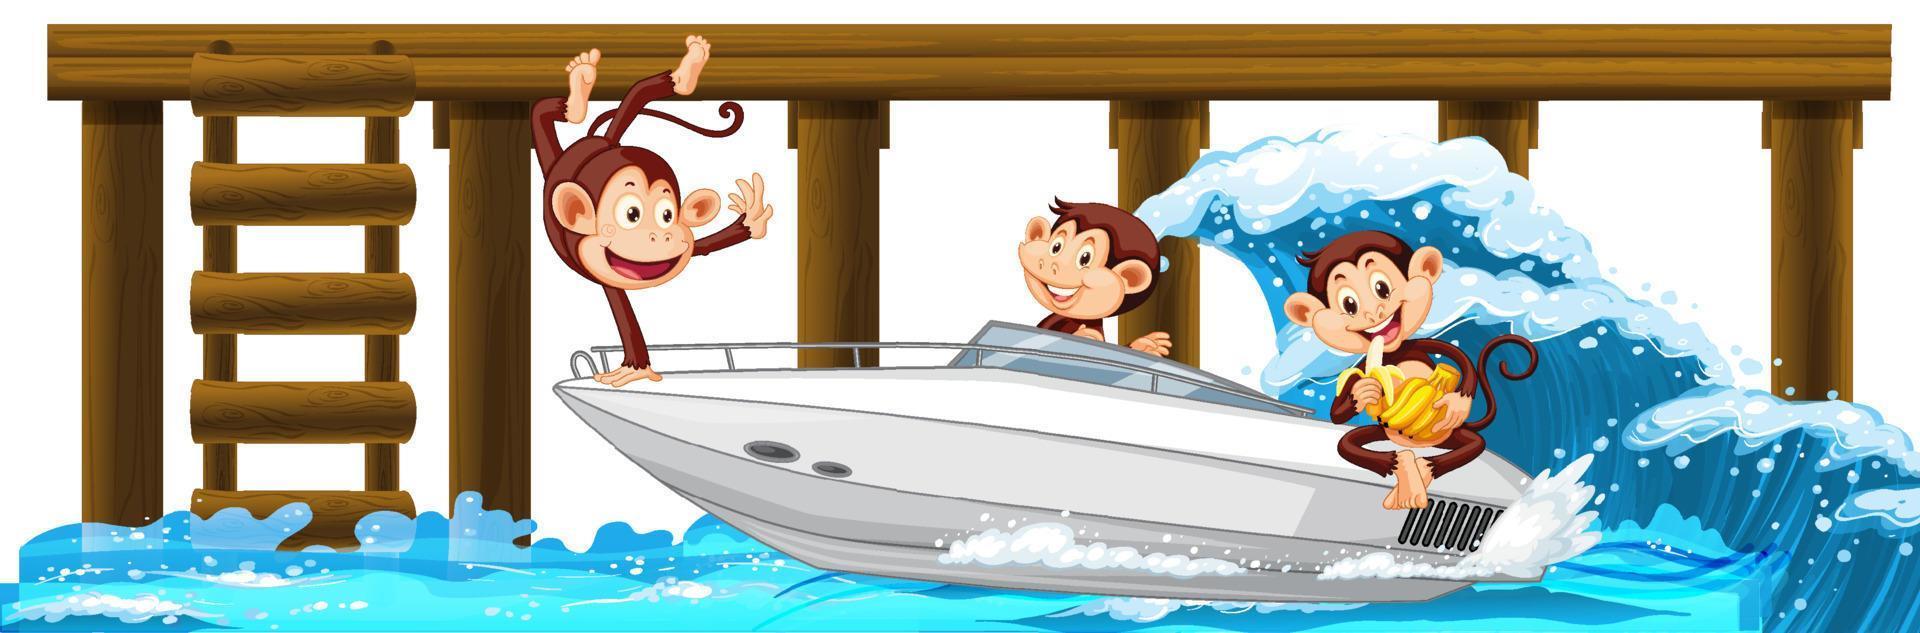 Wooden pier with many monkeys on speedboat vector